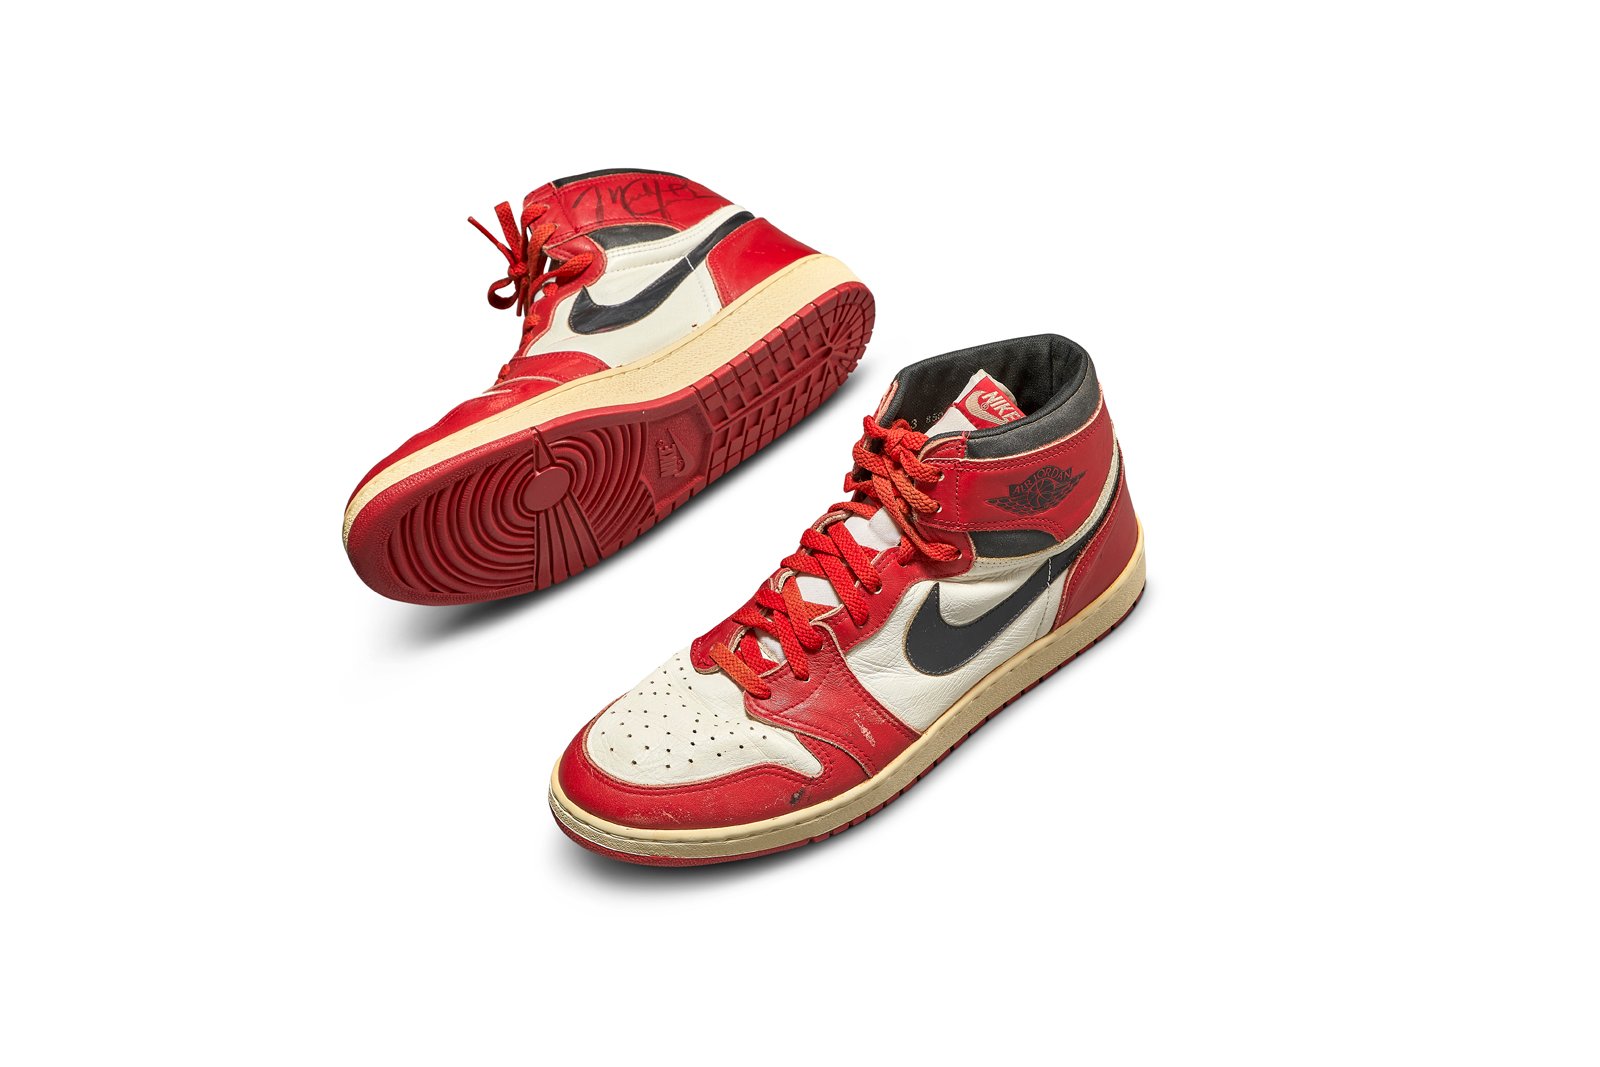 Michael Jordan's 1984 Game-Worn Nike Air Ships Up For Auction